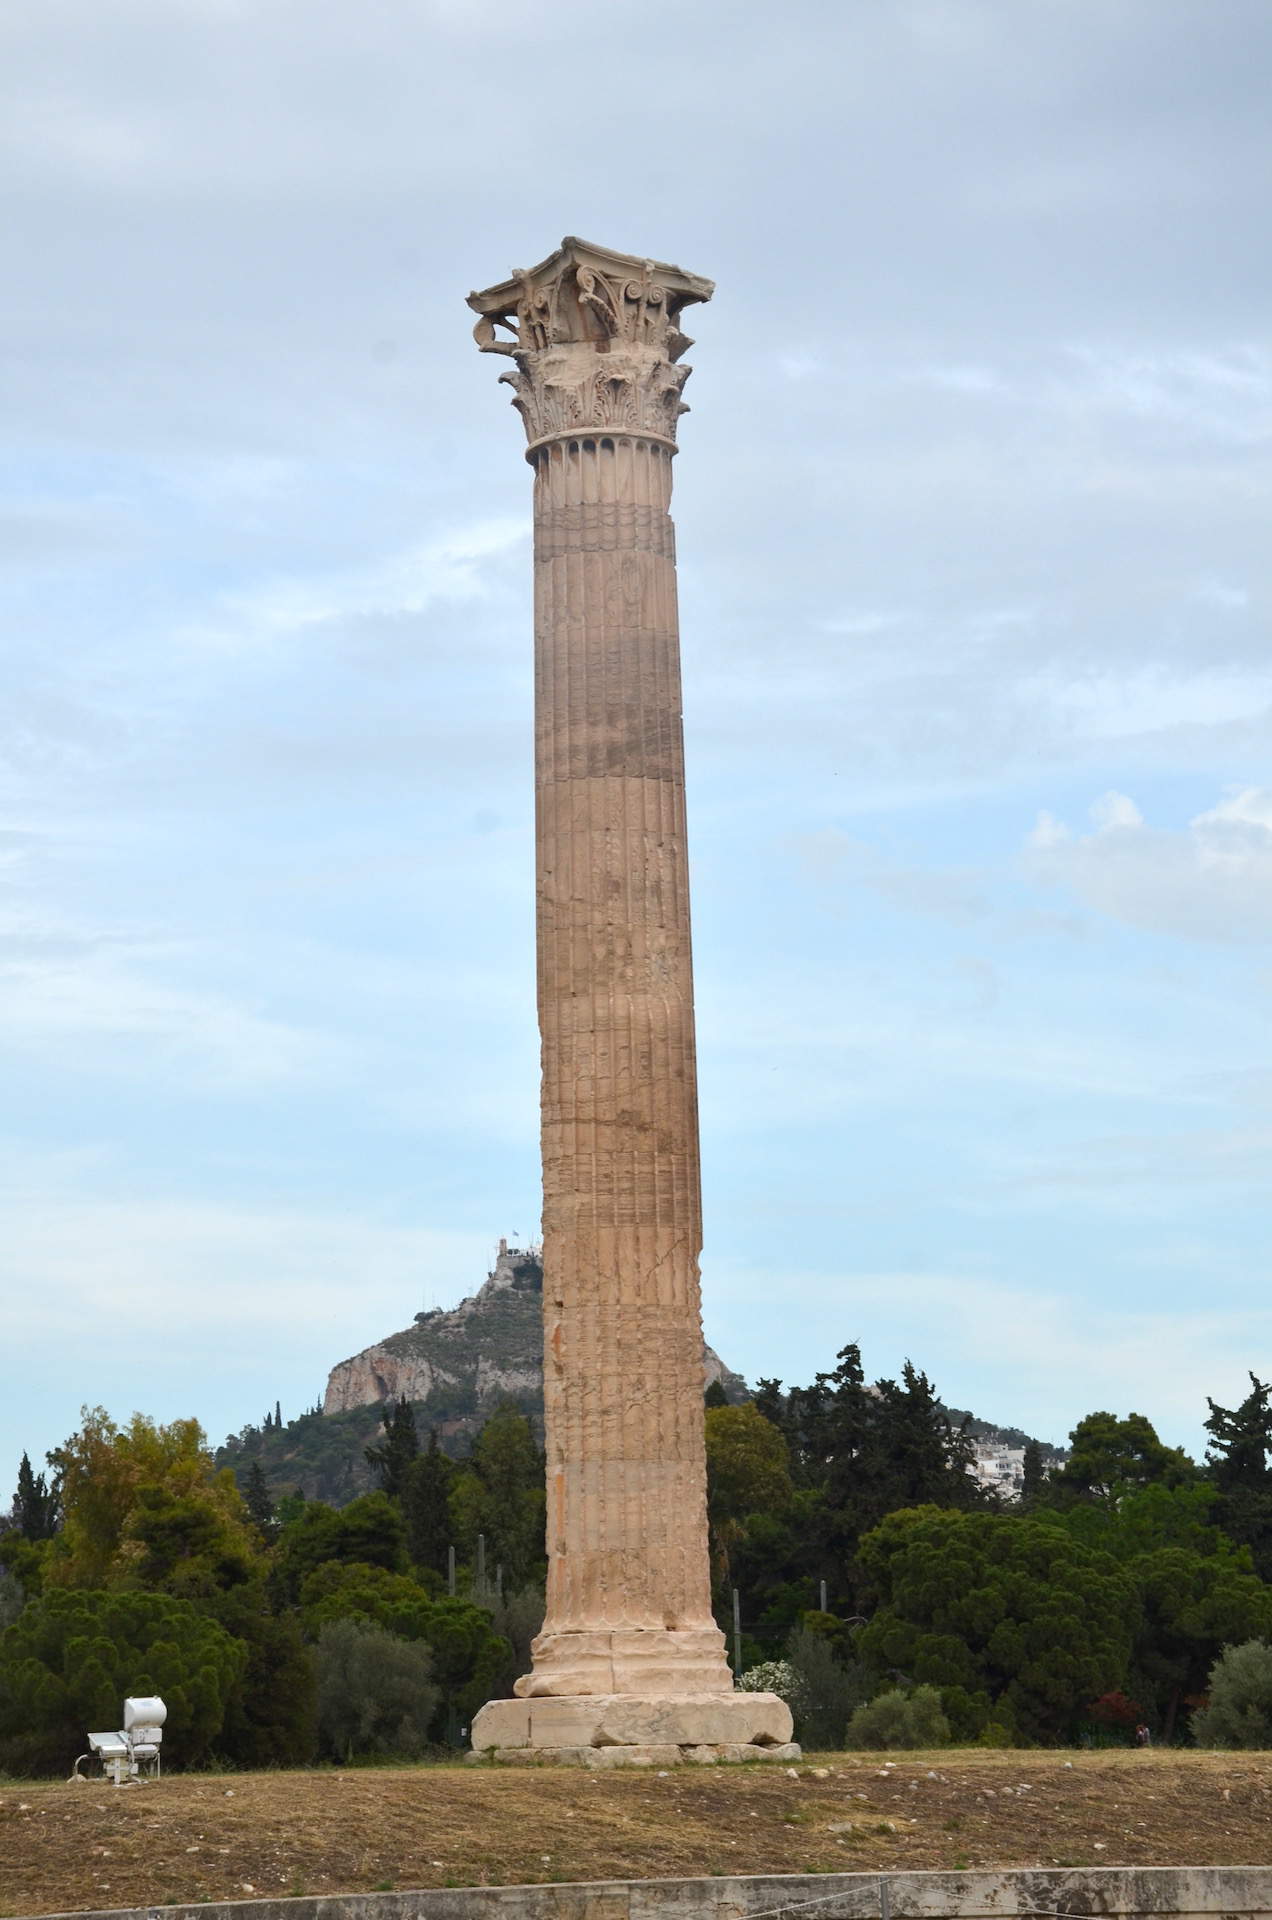 Lone column of the Temple of Olympian Zeus in Athens, Greece